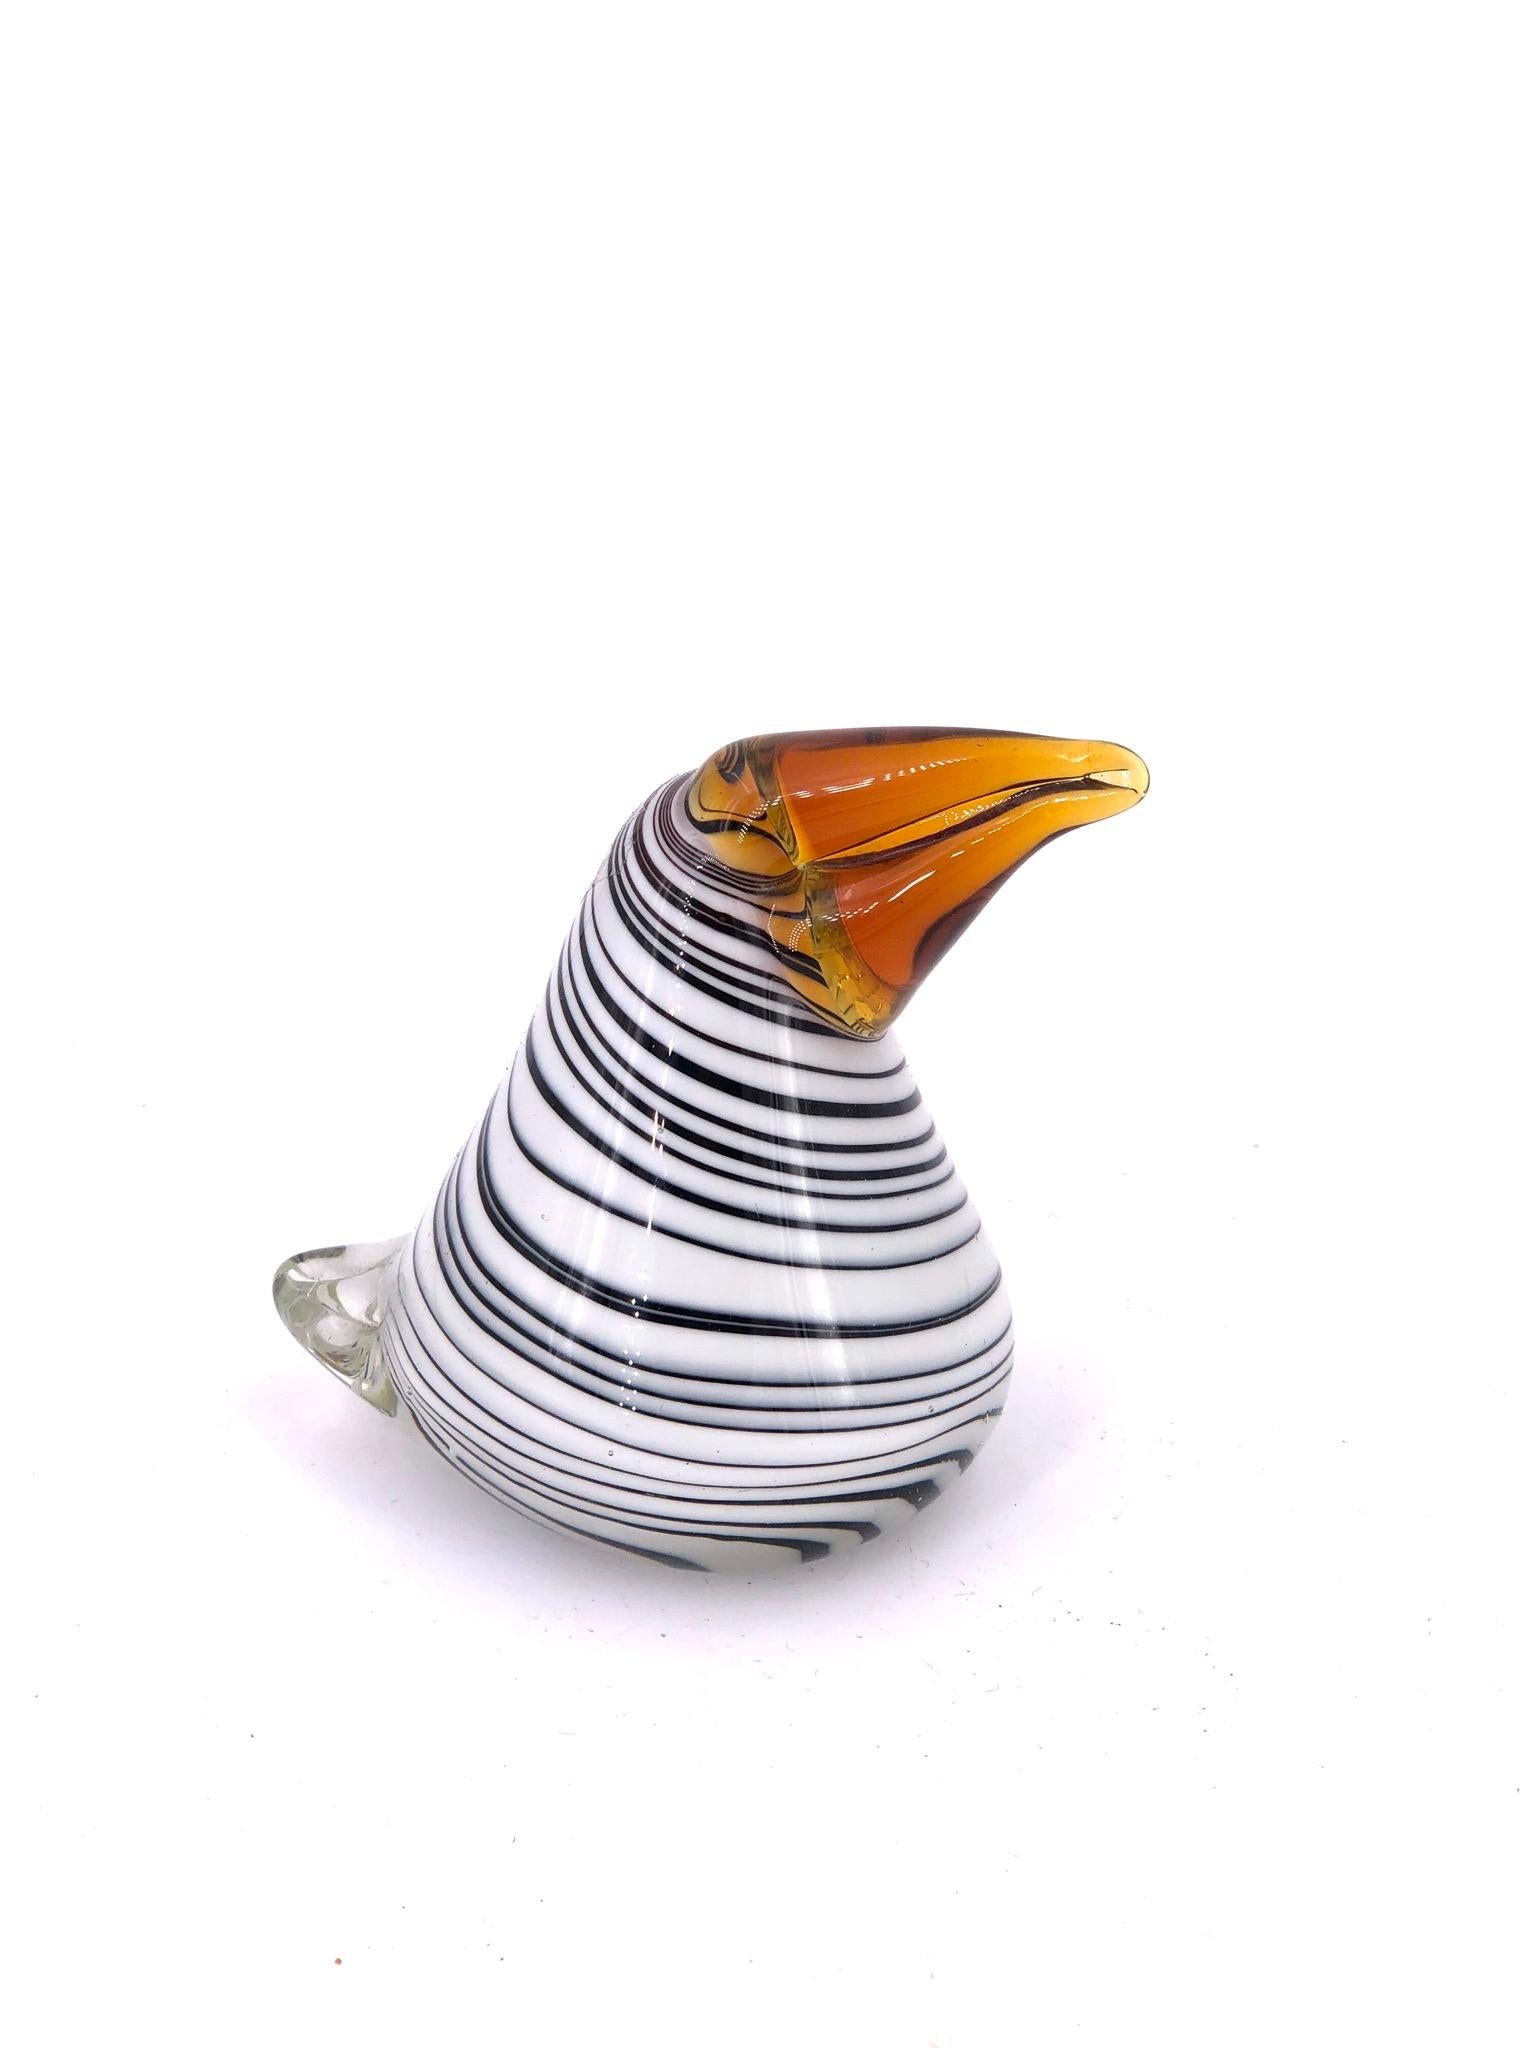 An incredible rare Murano Italian bird glass sculpture maybe a pelican or puffin, well-done piece in excellent condition.